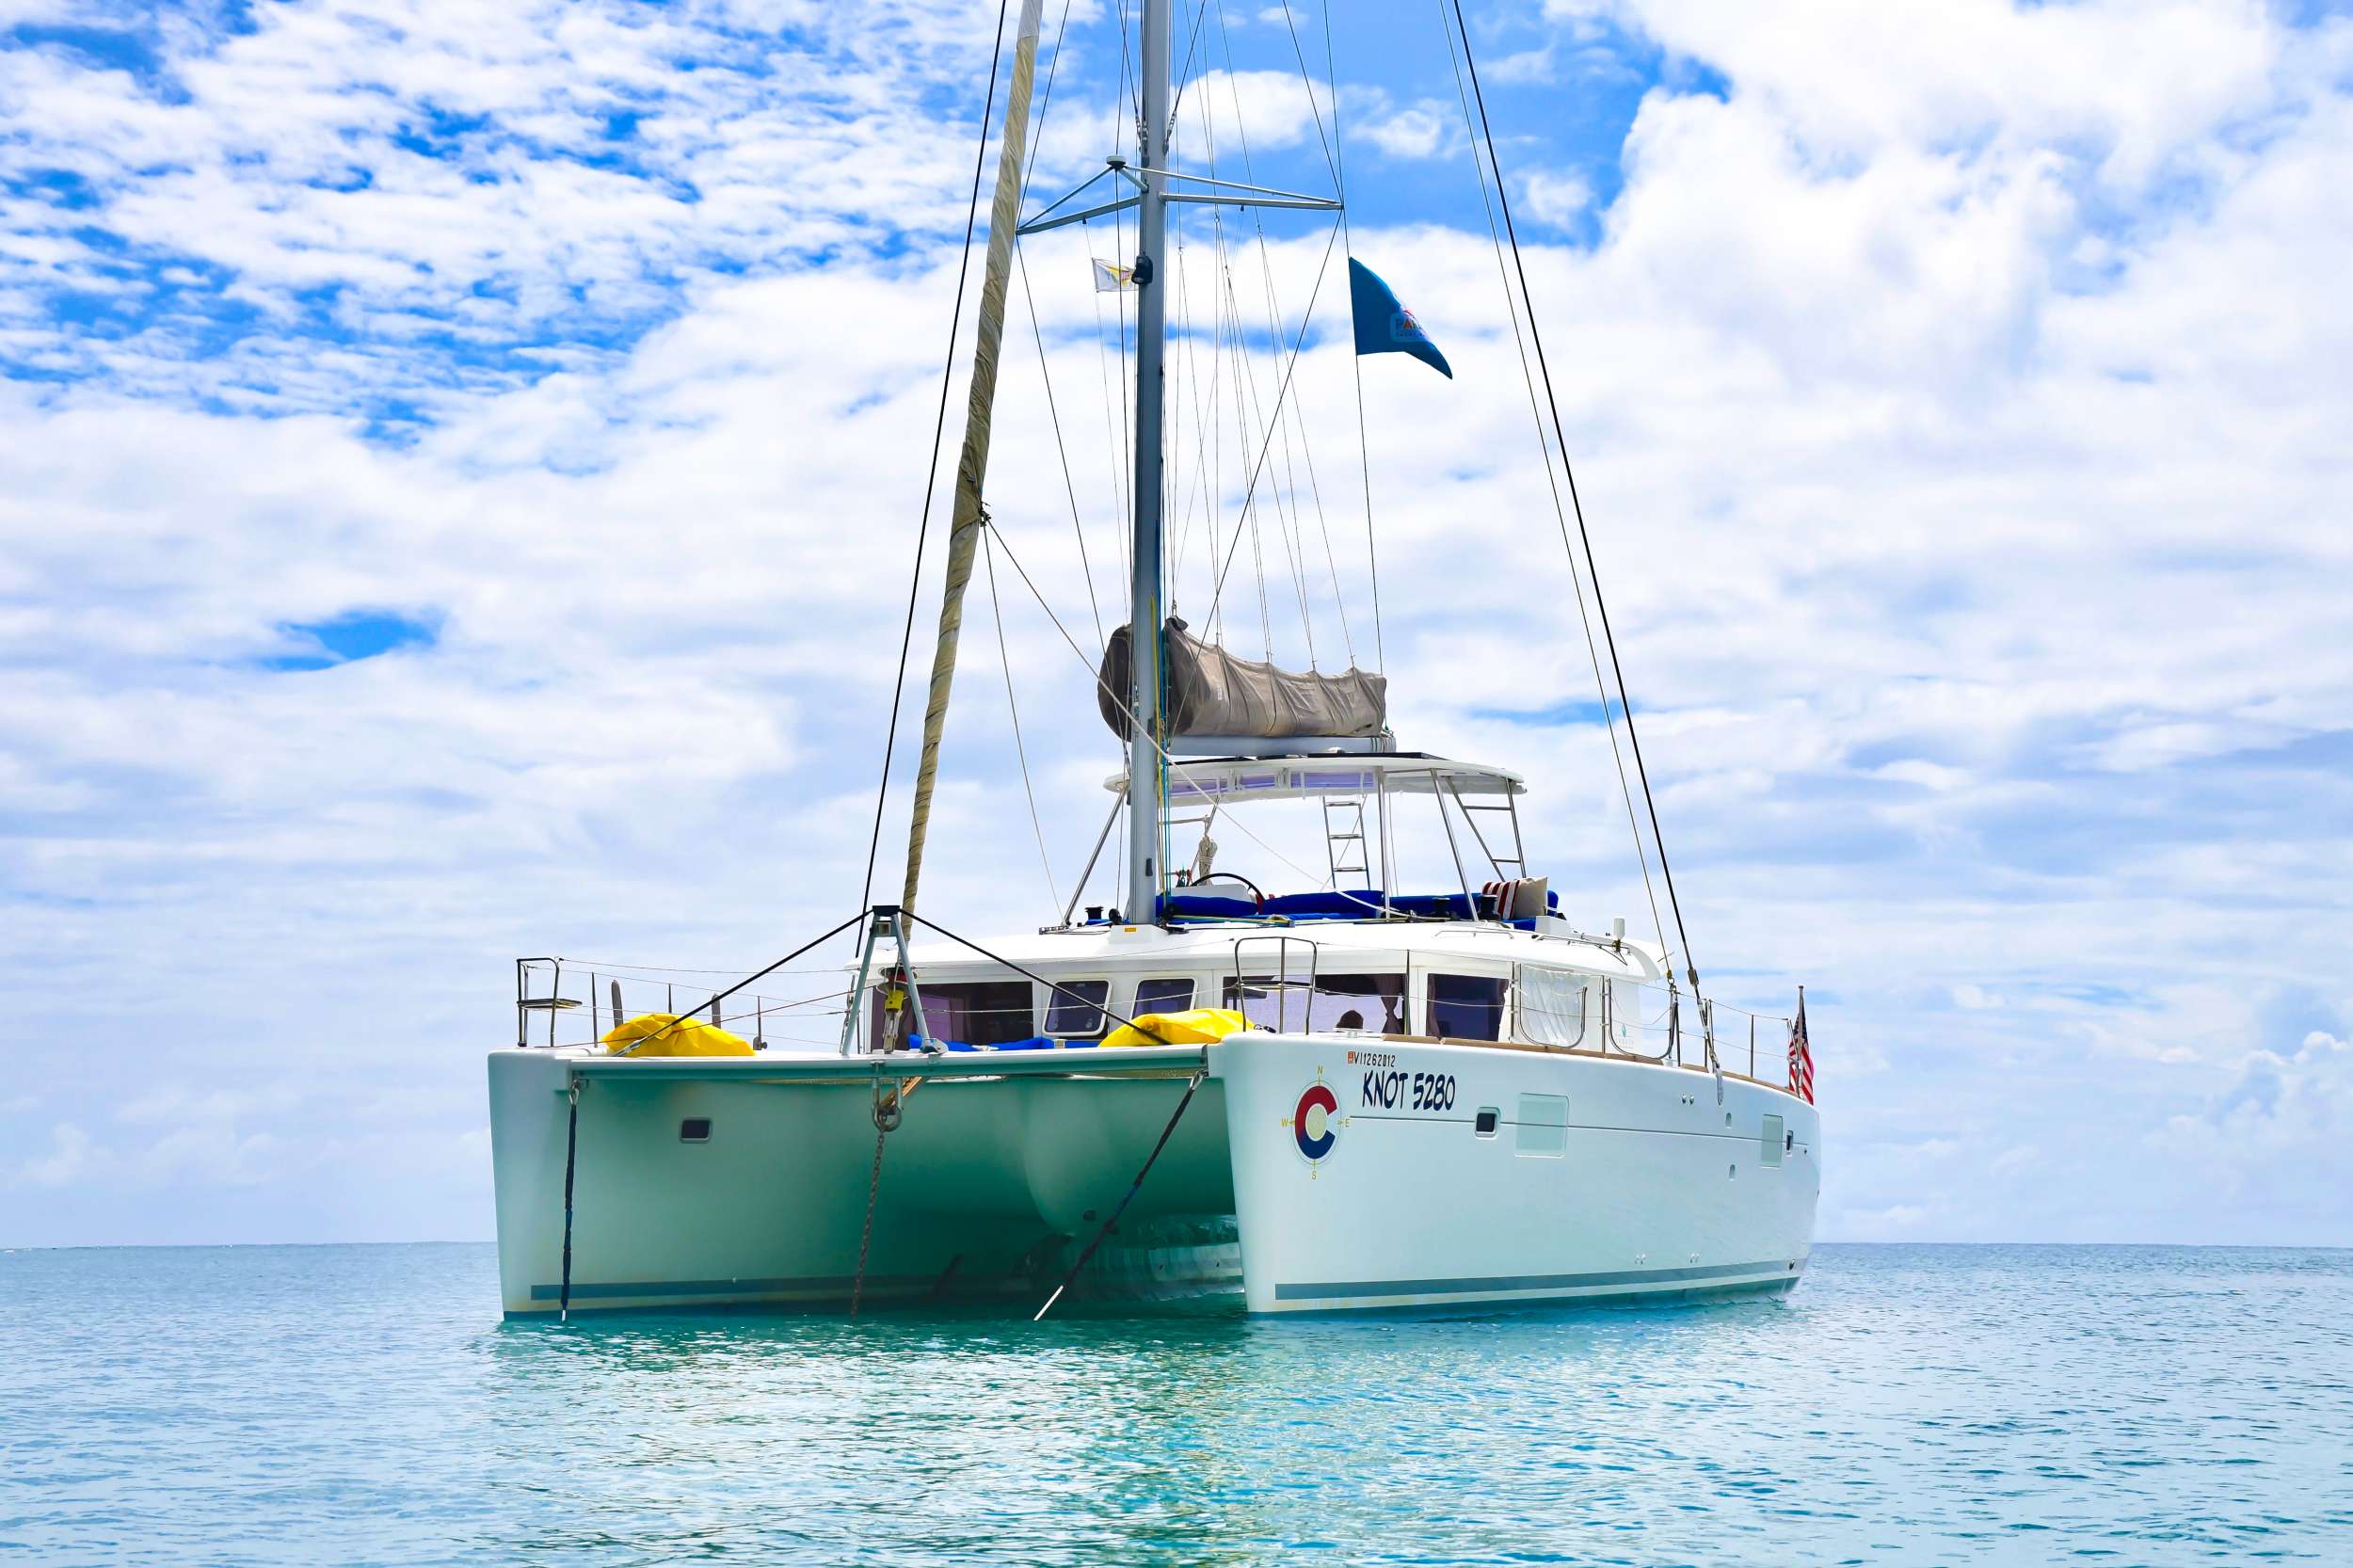 KNOT 5280 Yacht Charter - Ritzy Charters